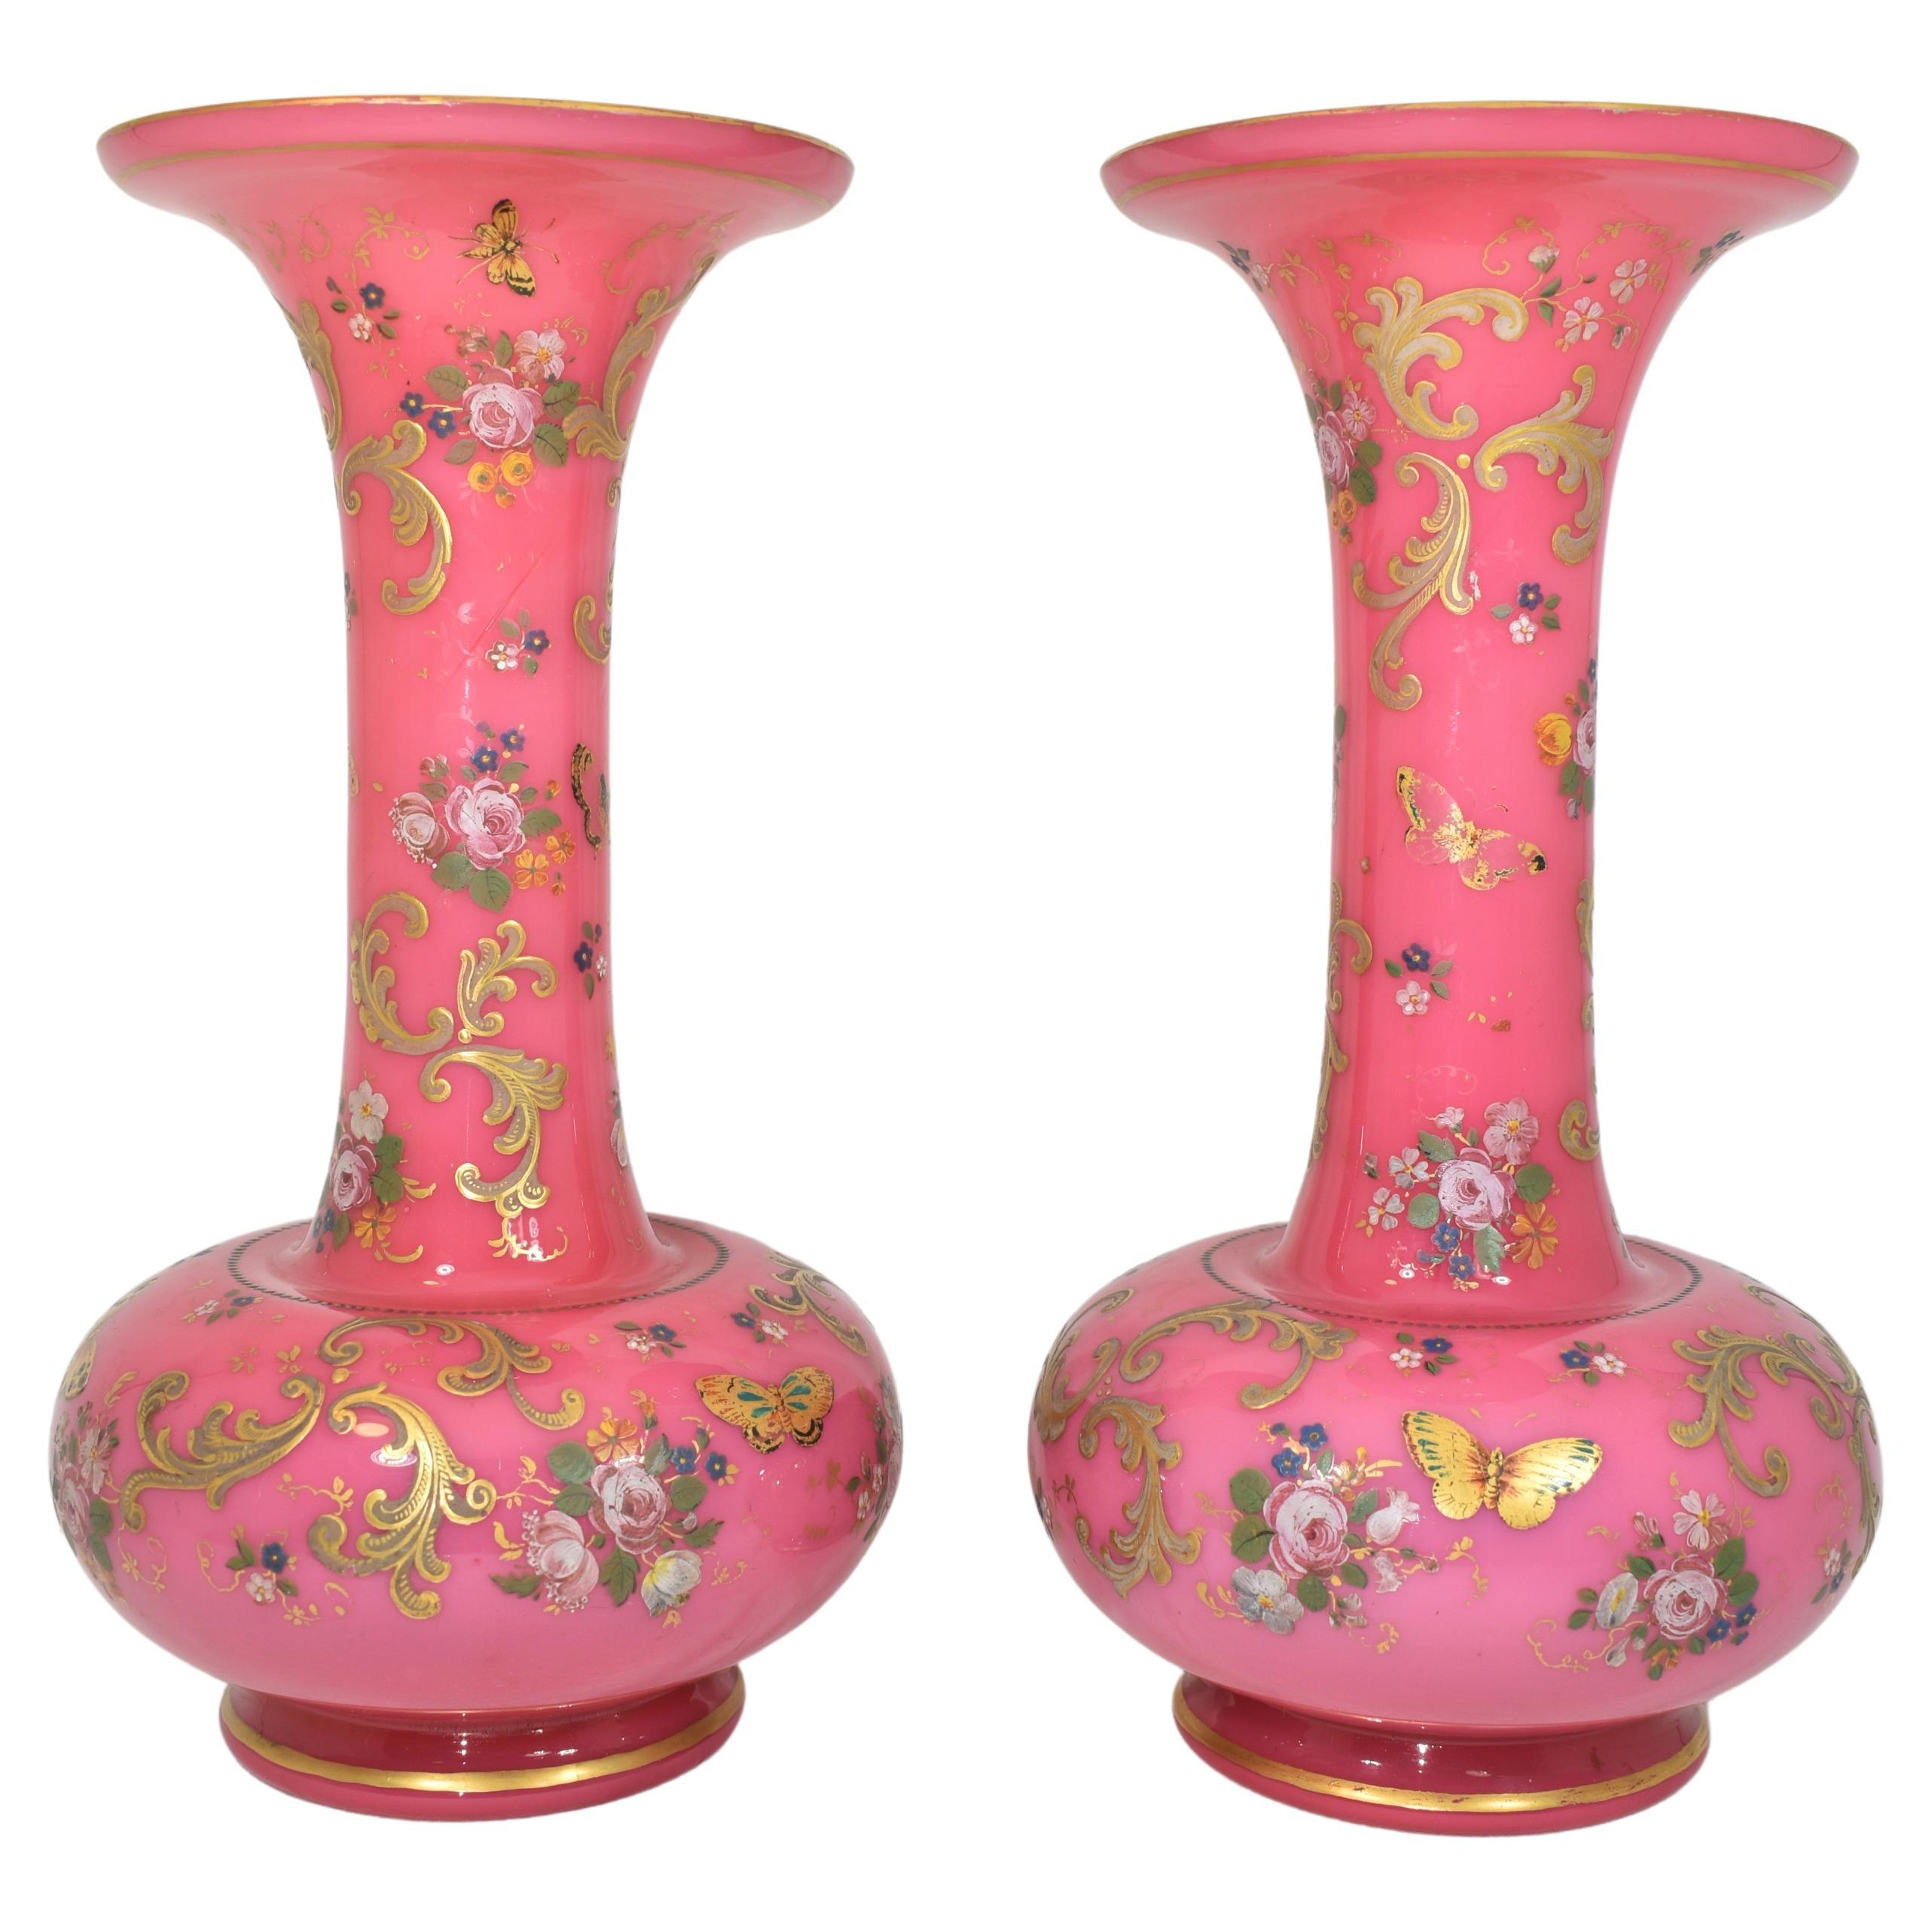 Antique Pair of Pink Opaline Enamelled Galss Vases, 19th Century For Sale